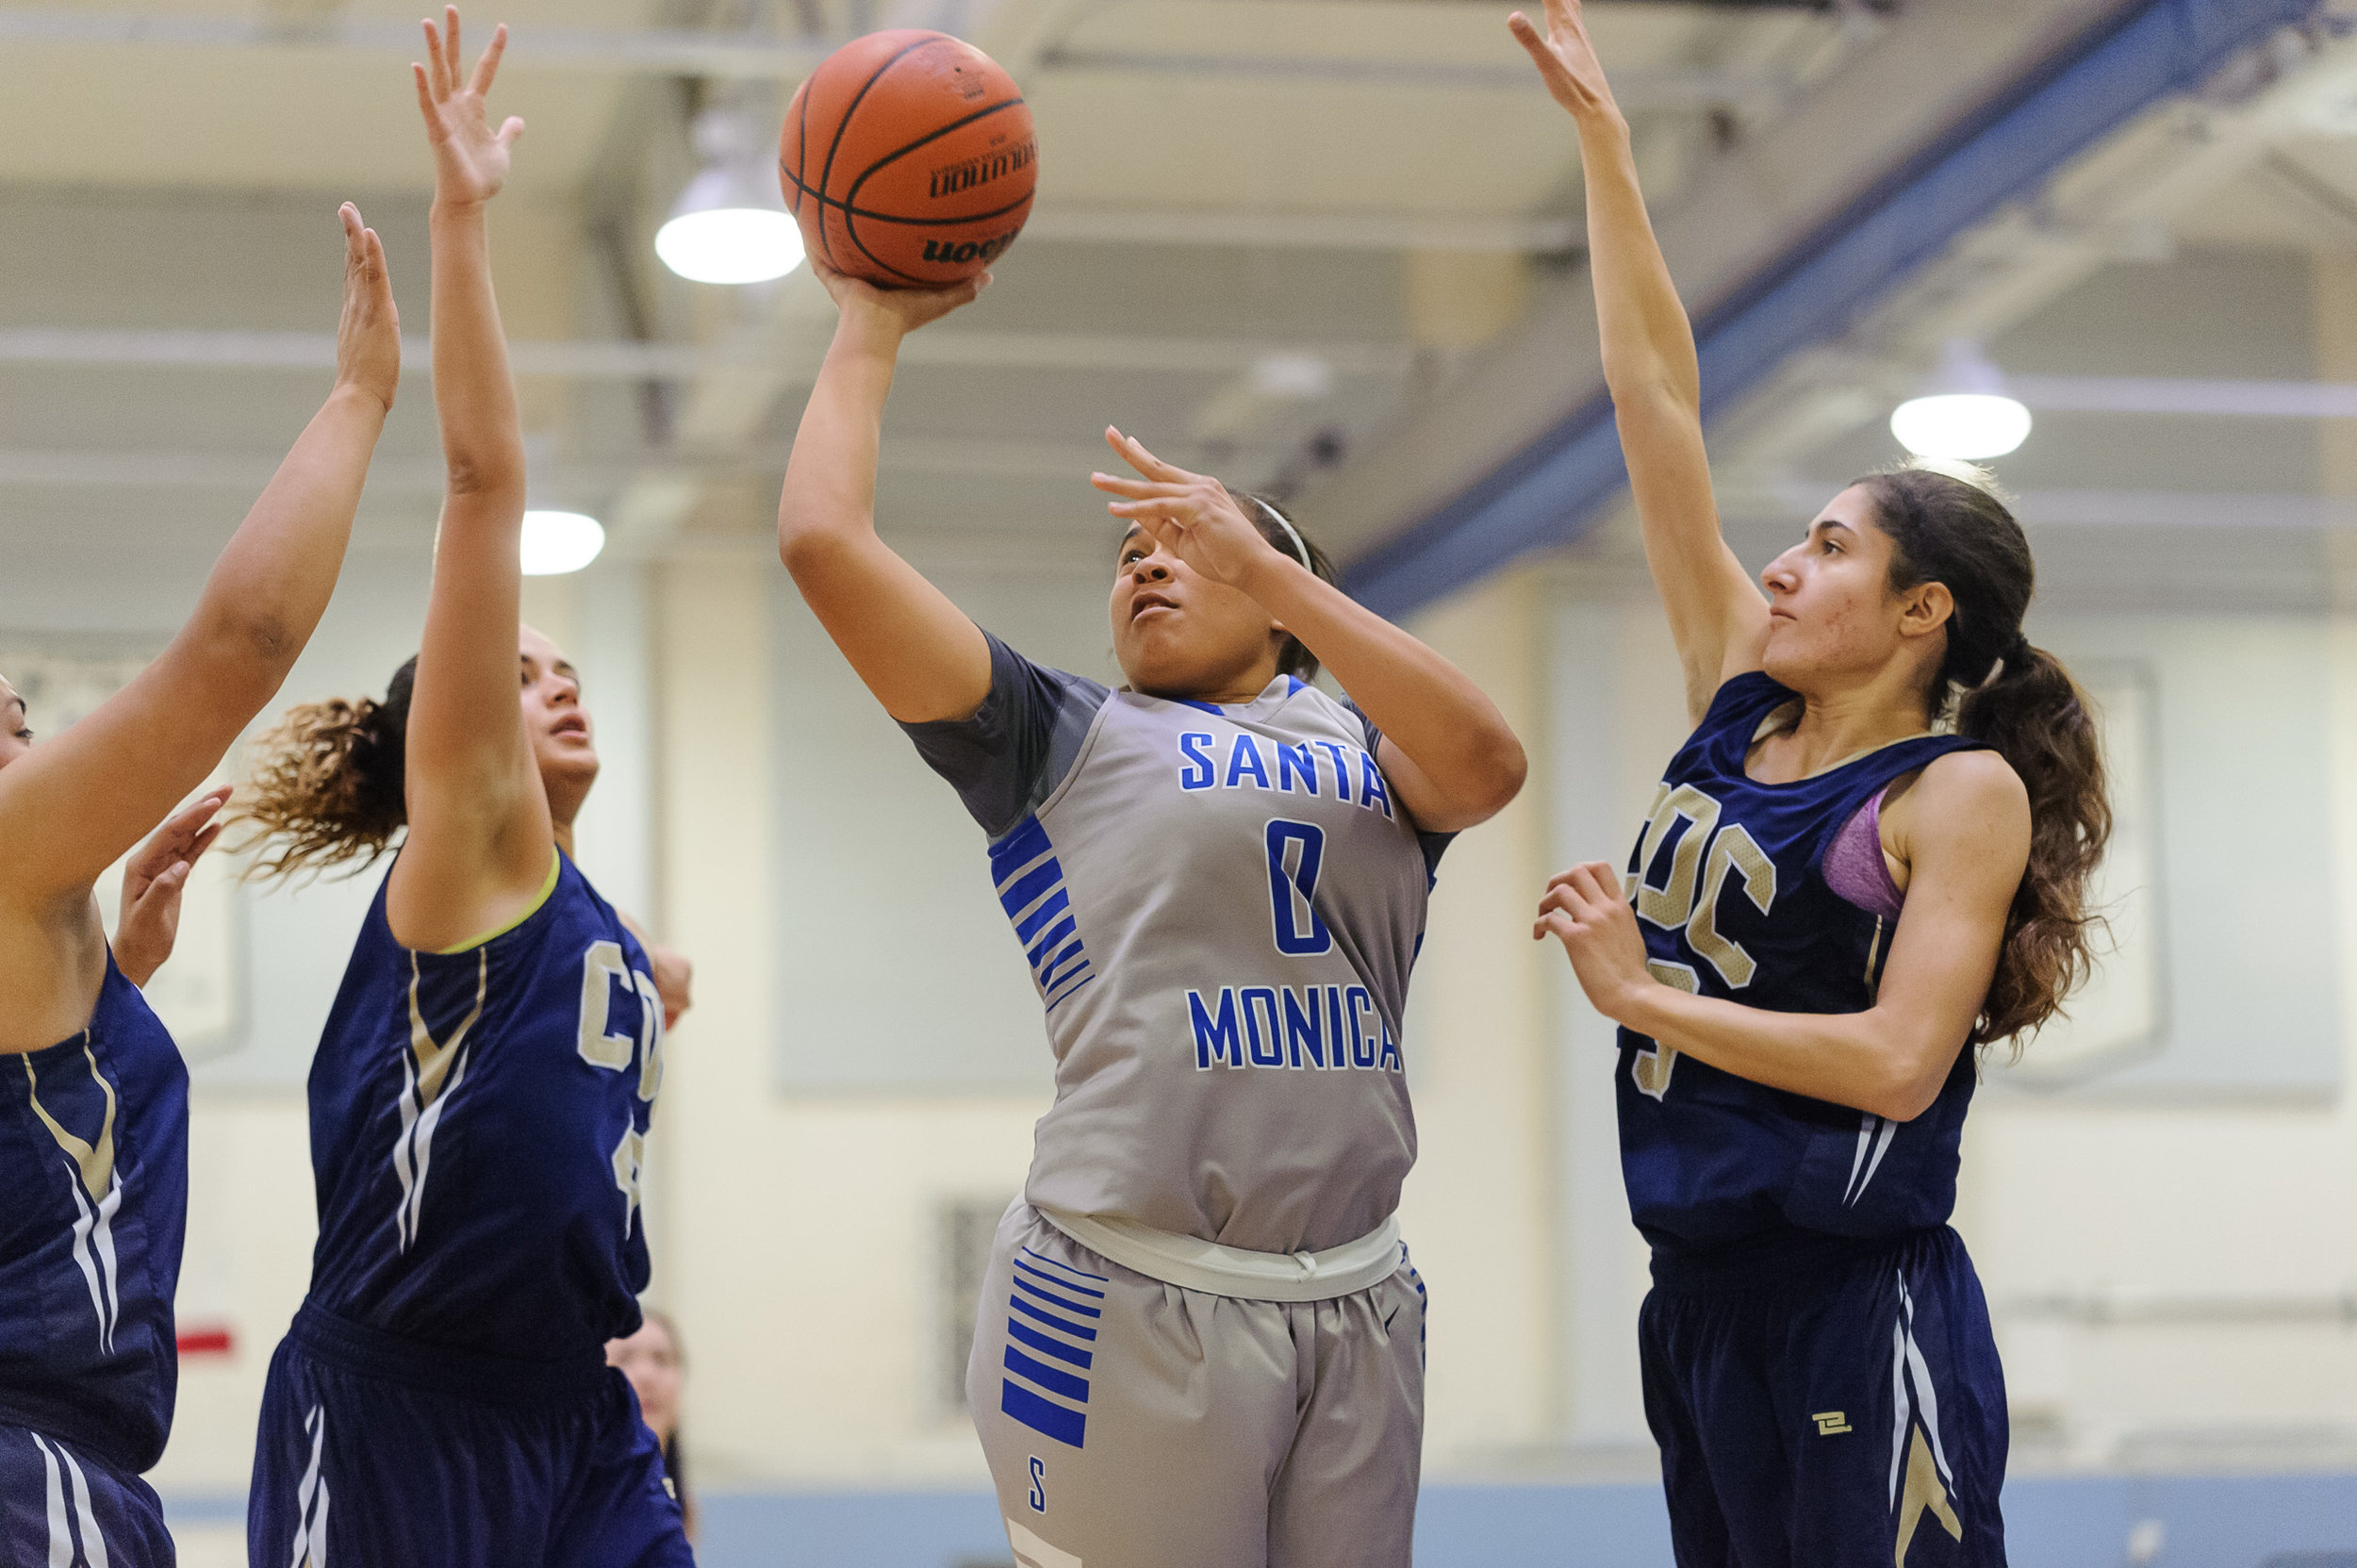  Rejinae Crandell (0,Middle) of Santa Monica College shoots a shot in the lane while swarmed by the College of the Canyons defense. The Santa Monica College Corsairs lose the game 108-70 to the College of the Canyons Cougars. The game was held at the